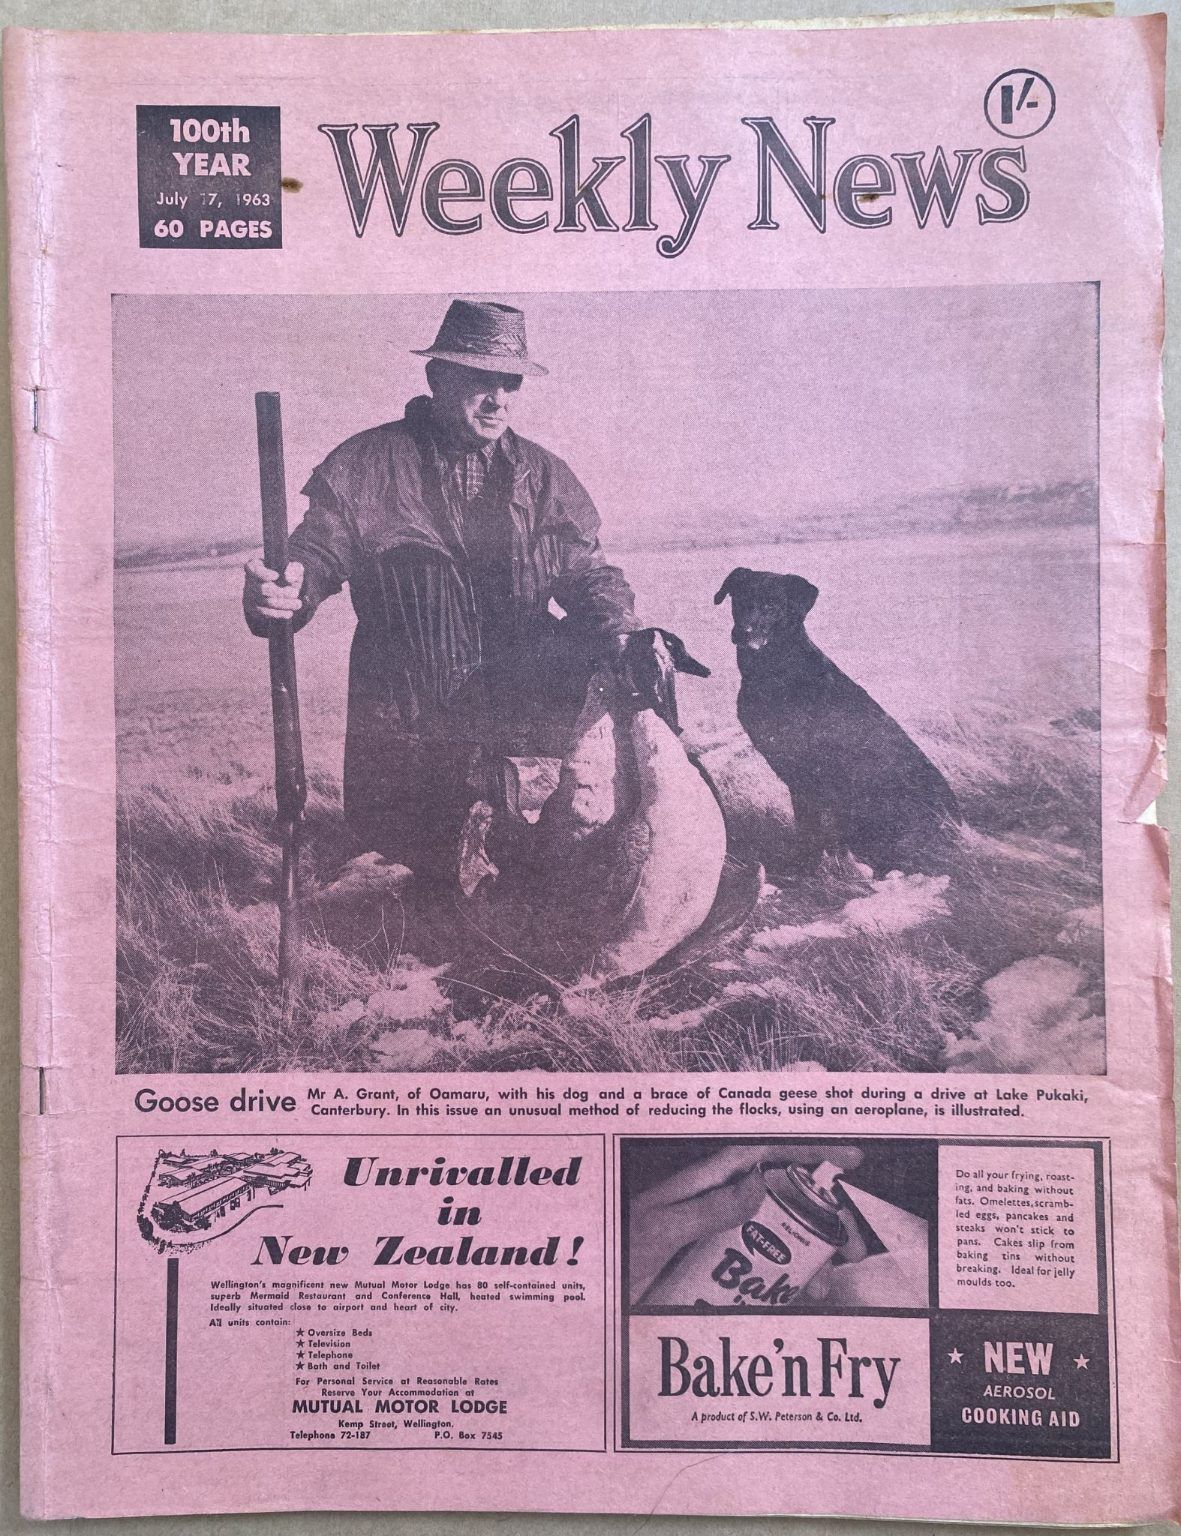 OLD NEWSPAPER: The Weekly News, No. 5199, 17 July 1963